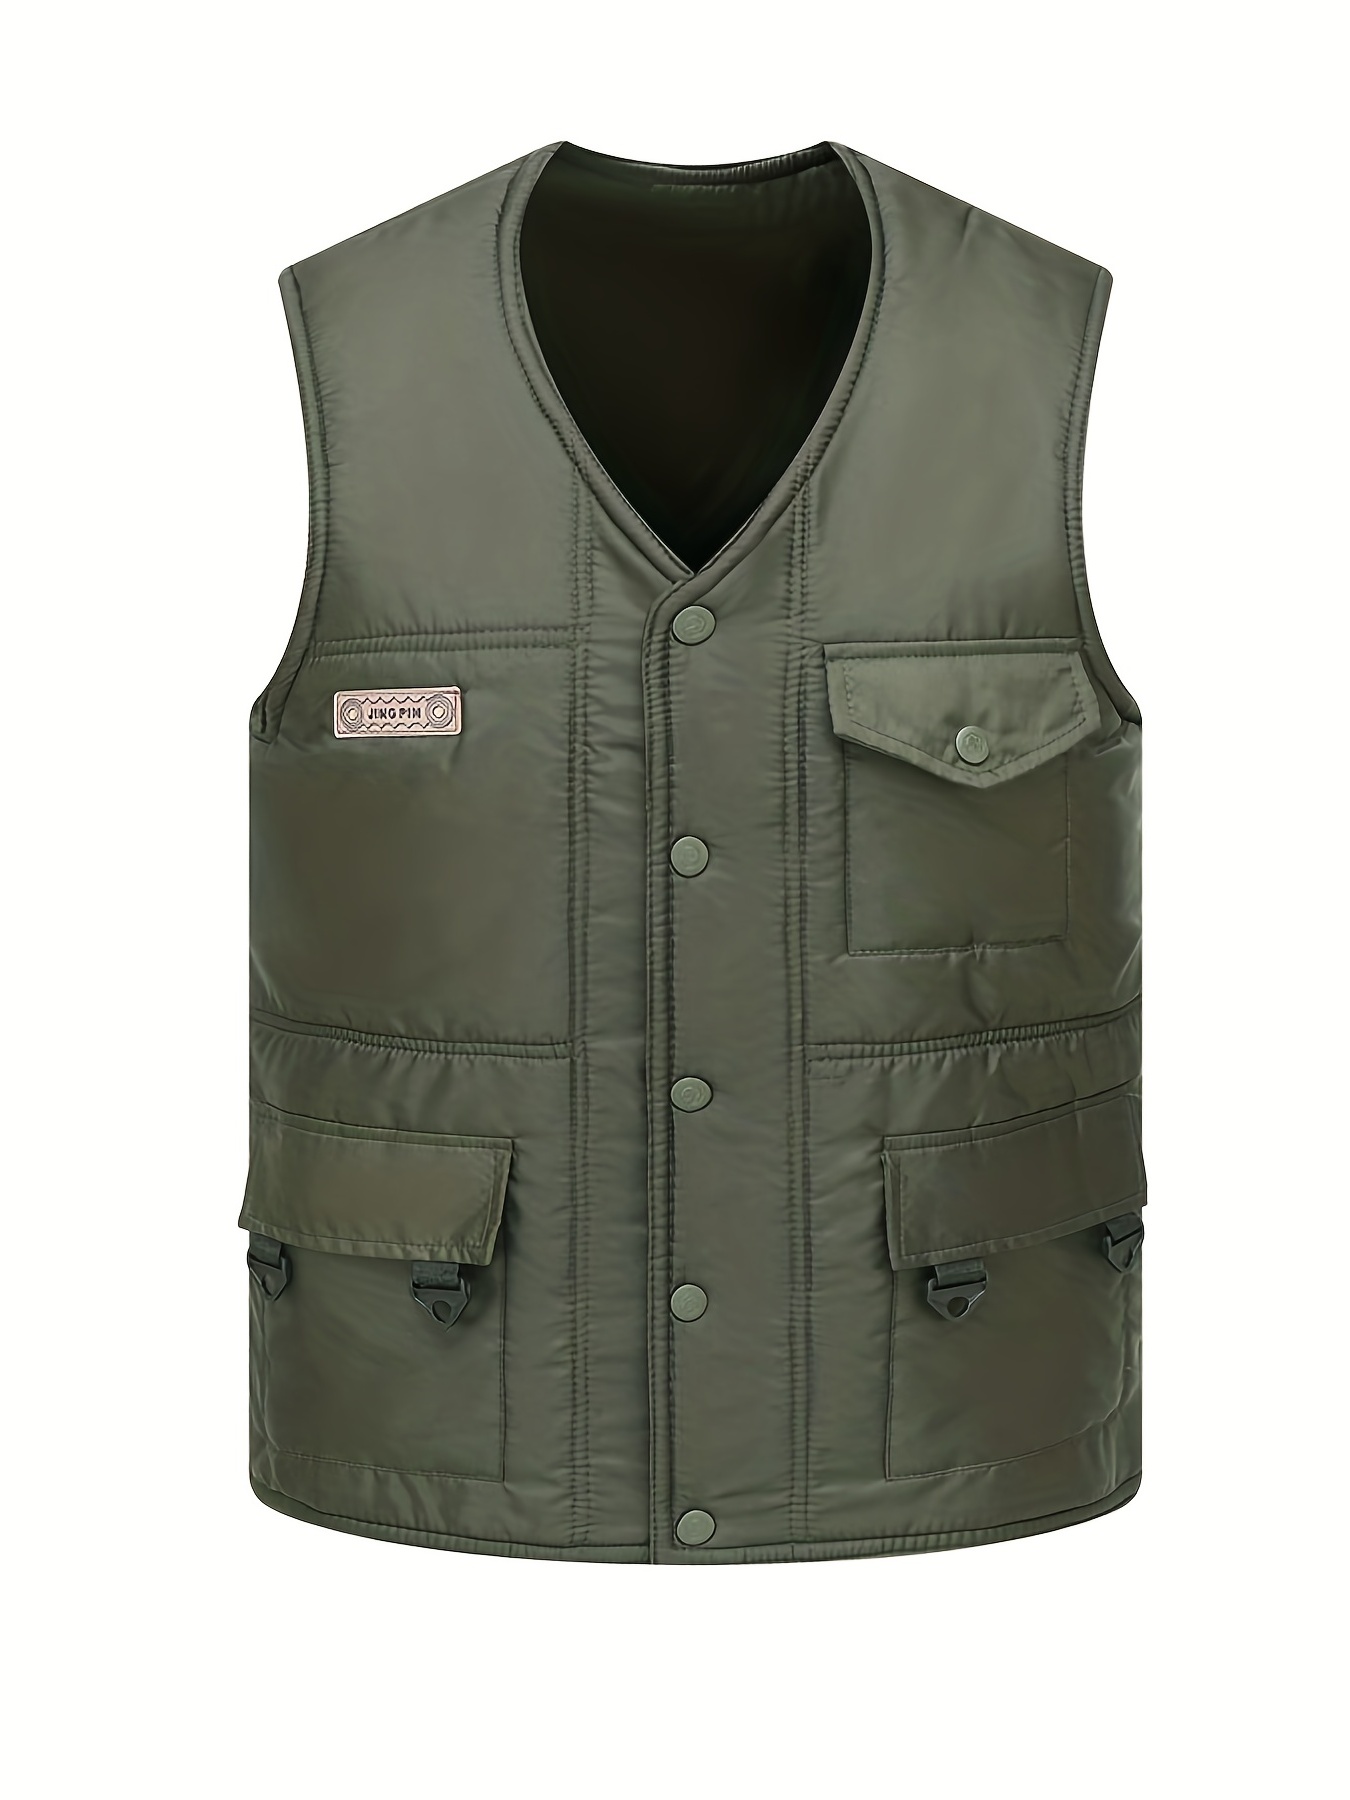 Trendy Padded Vest, Men's Casual V Neck Button Up Vest For Autumn Winter Outdoor Fishing Hiking